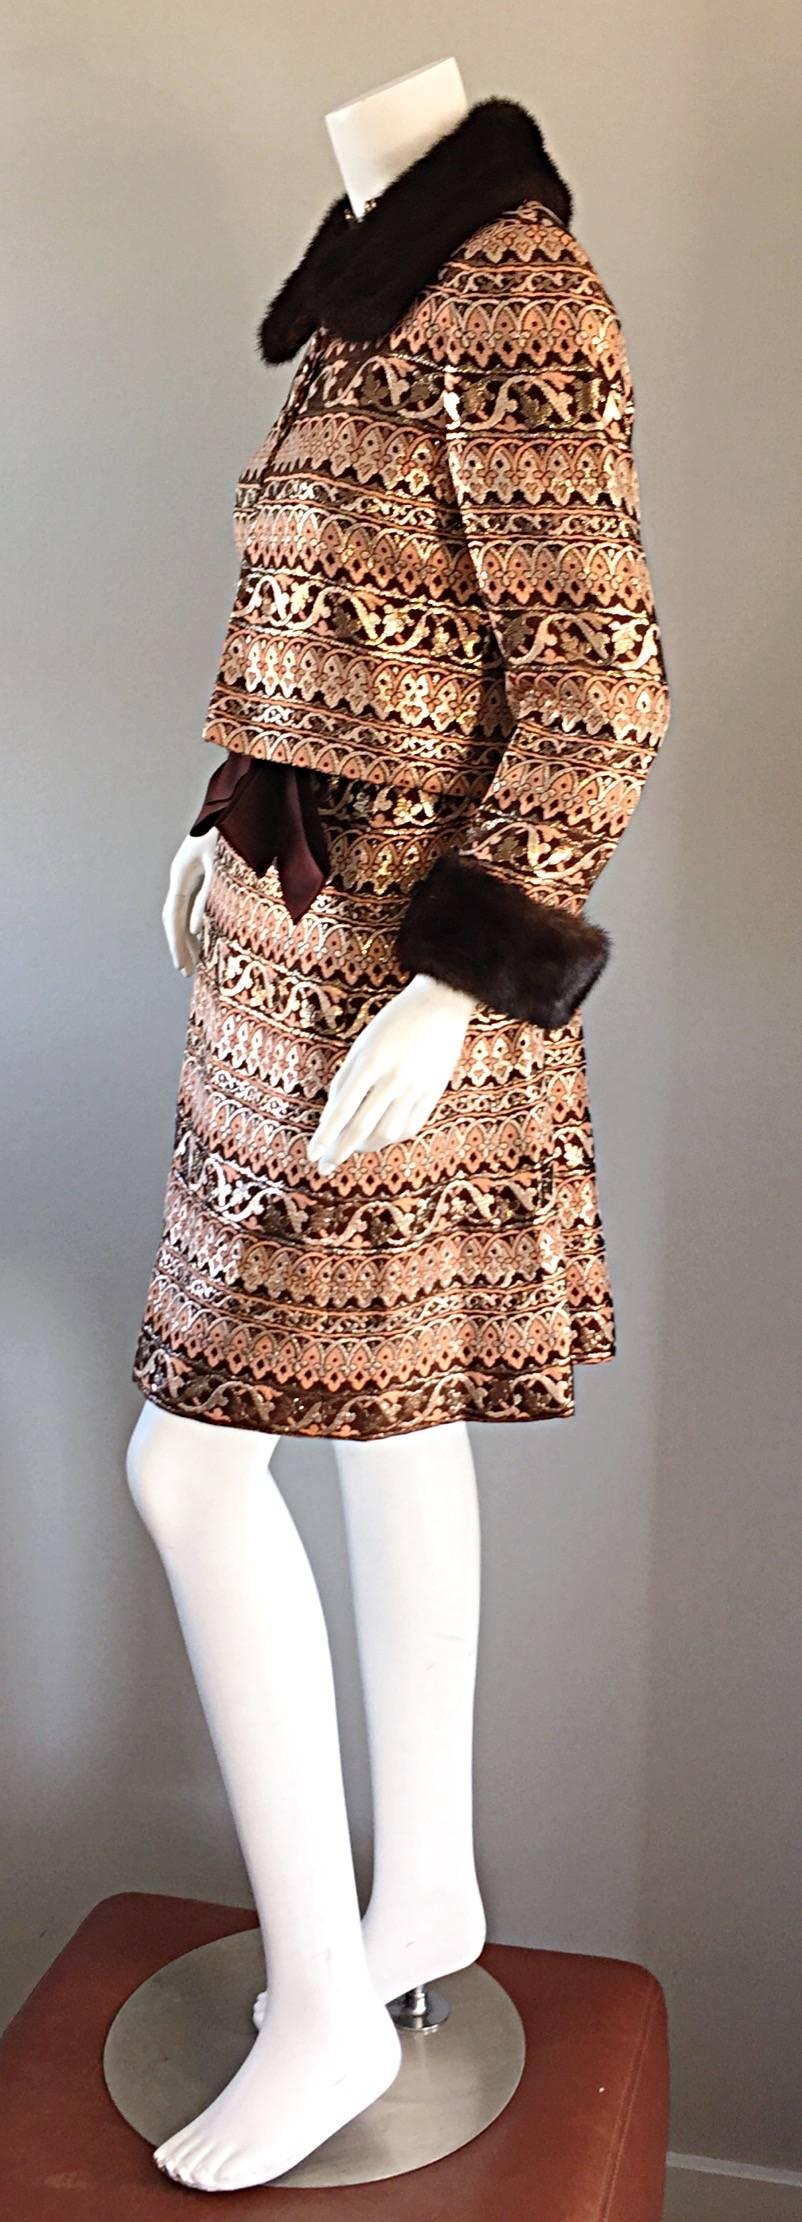 Incredible vintage (early 60s) Adele Simpson silk metallic brocade A-Line dress, with matching jacket, trimmed in mink fur. Sensational prints in pink, brown, tan, and white gold. Attached brown silk bow belt at waist. This set is from Simpson's